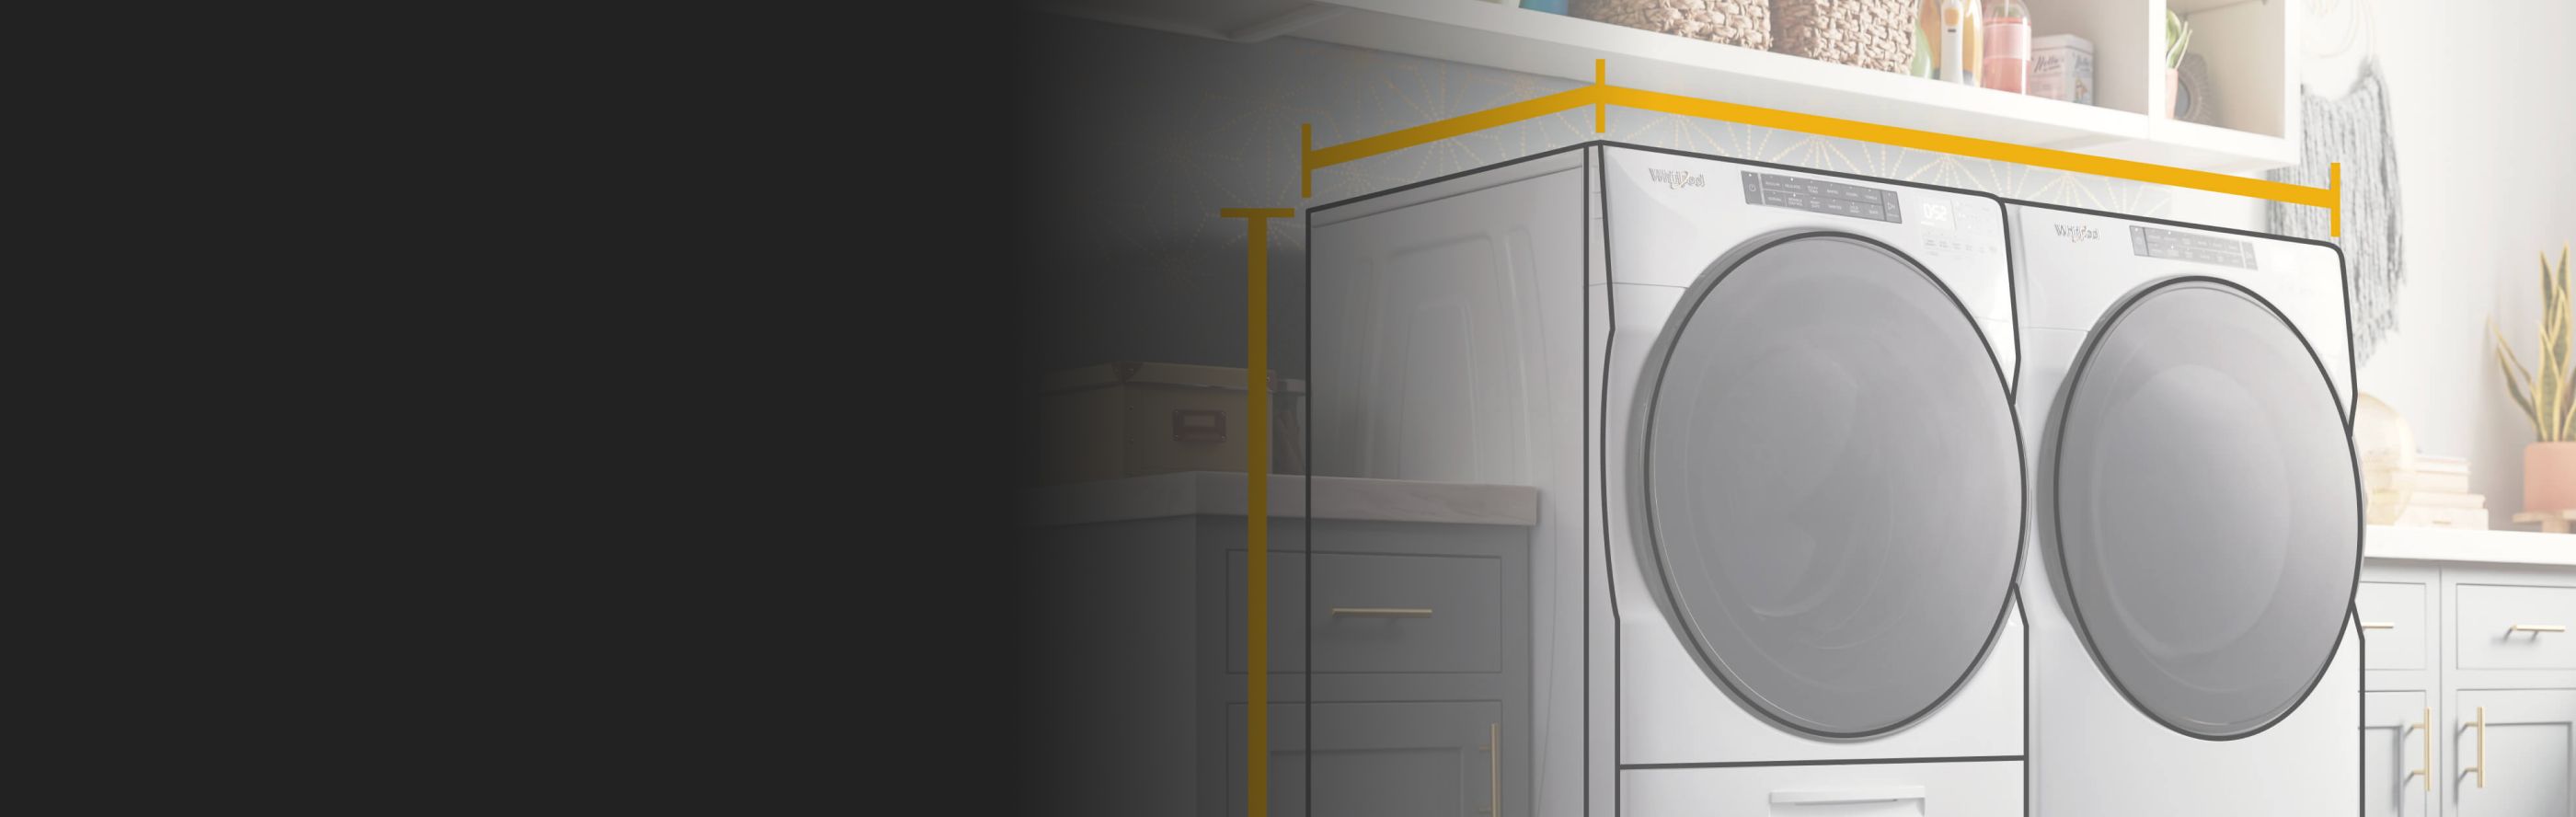 Whirlpool® side-by-side washer and dryer with dimensions marked